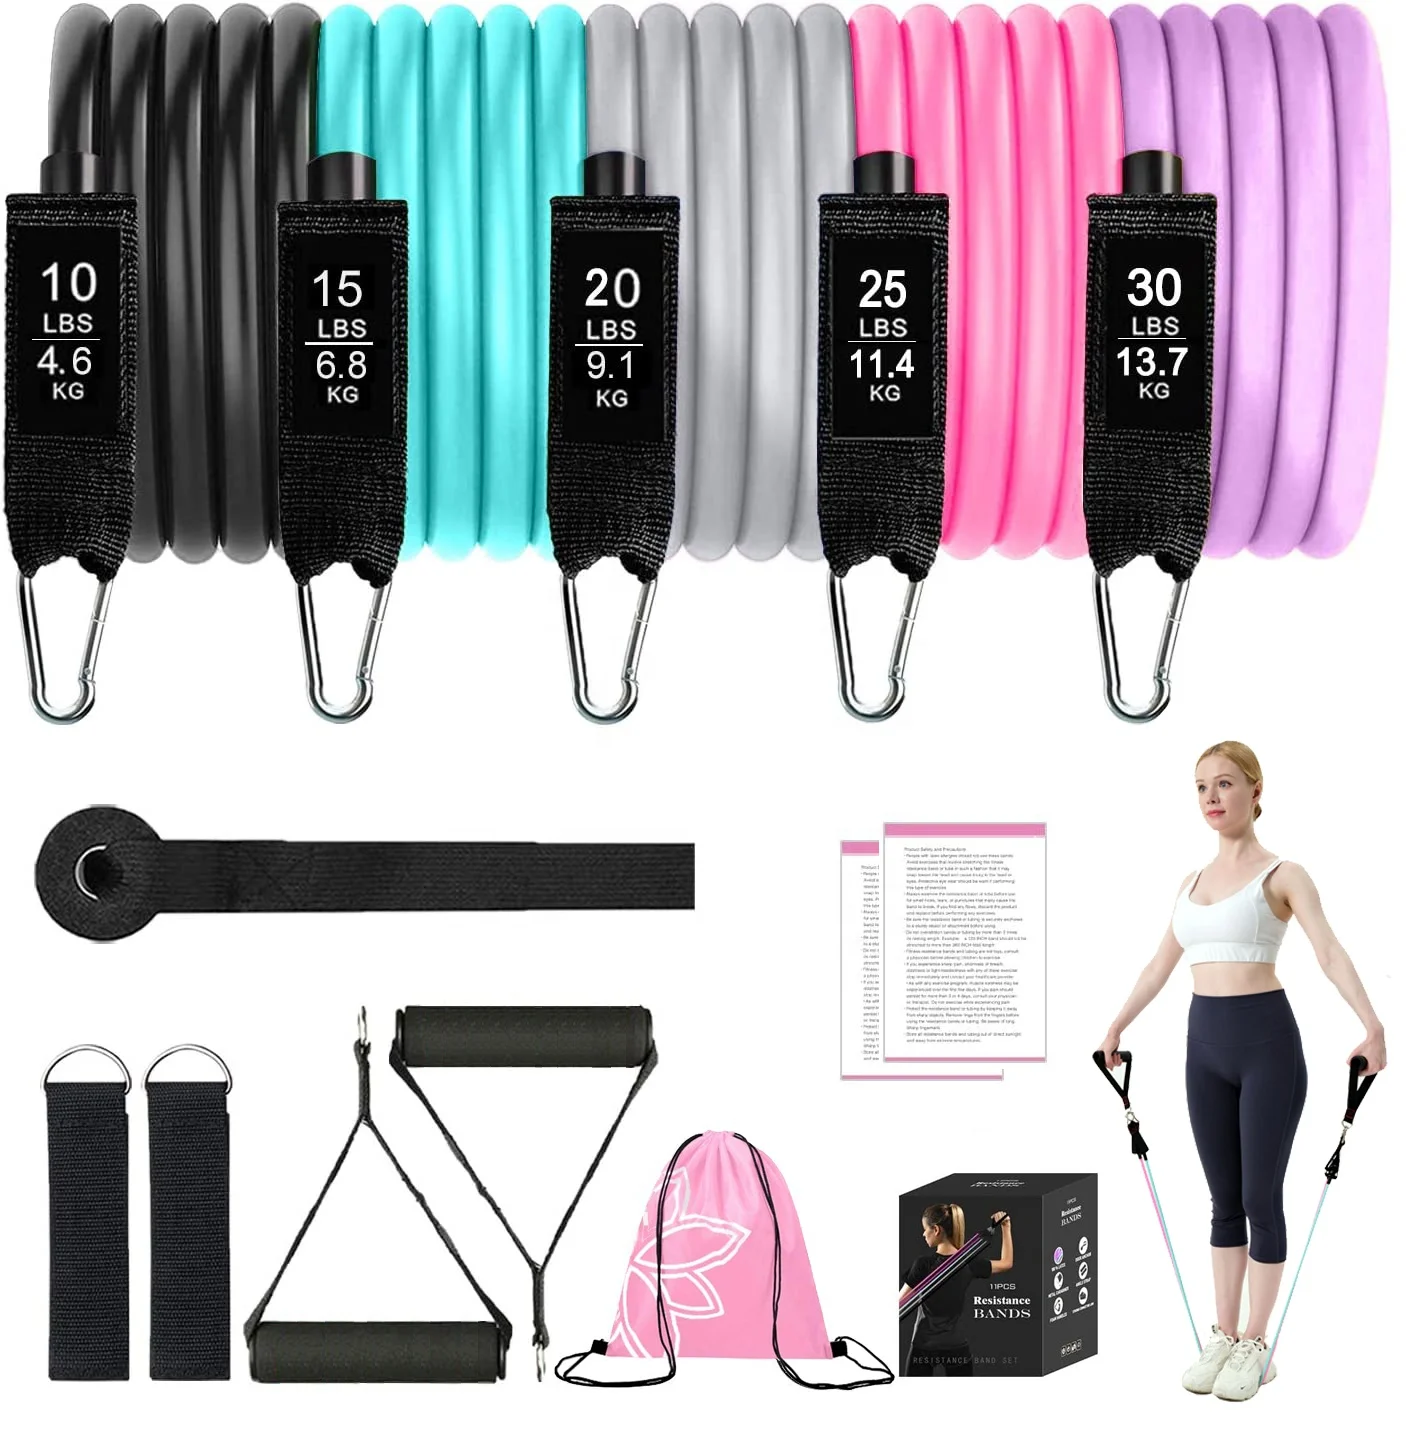 

Amazon Hot Sale 150lb 100lb Pull Up Colorful Latex Tpe Exercise Resistance Workout Ankle Booty Tube Tubing Bands Set, Black+gray+pink+purple+green